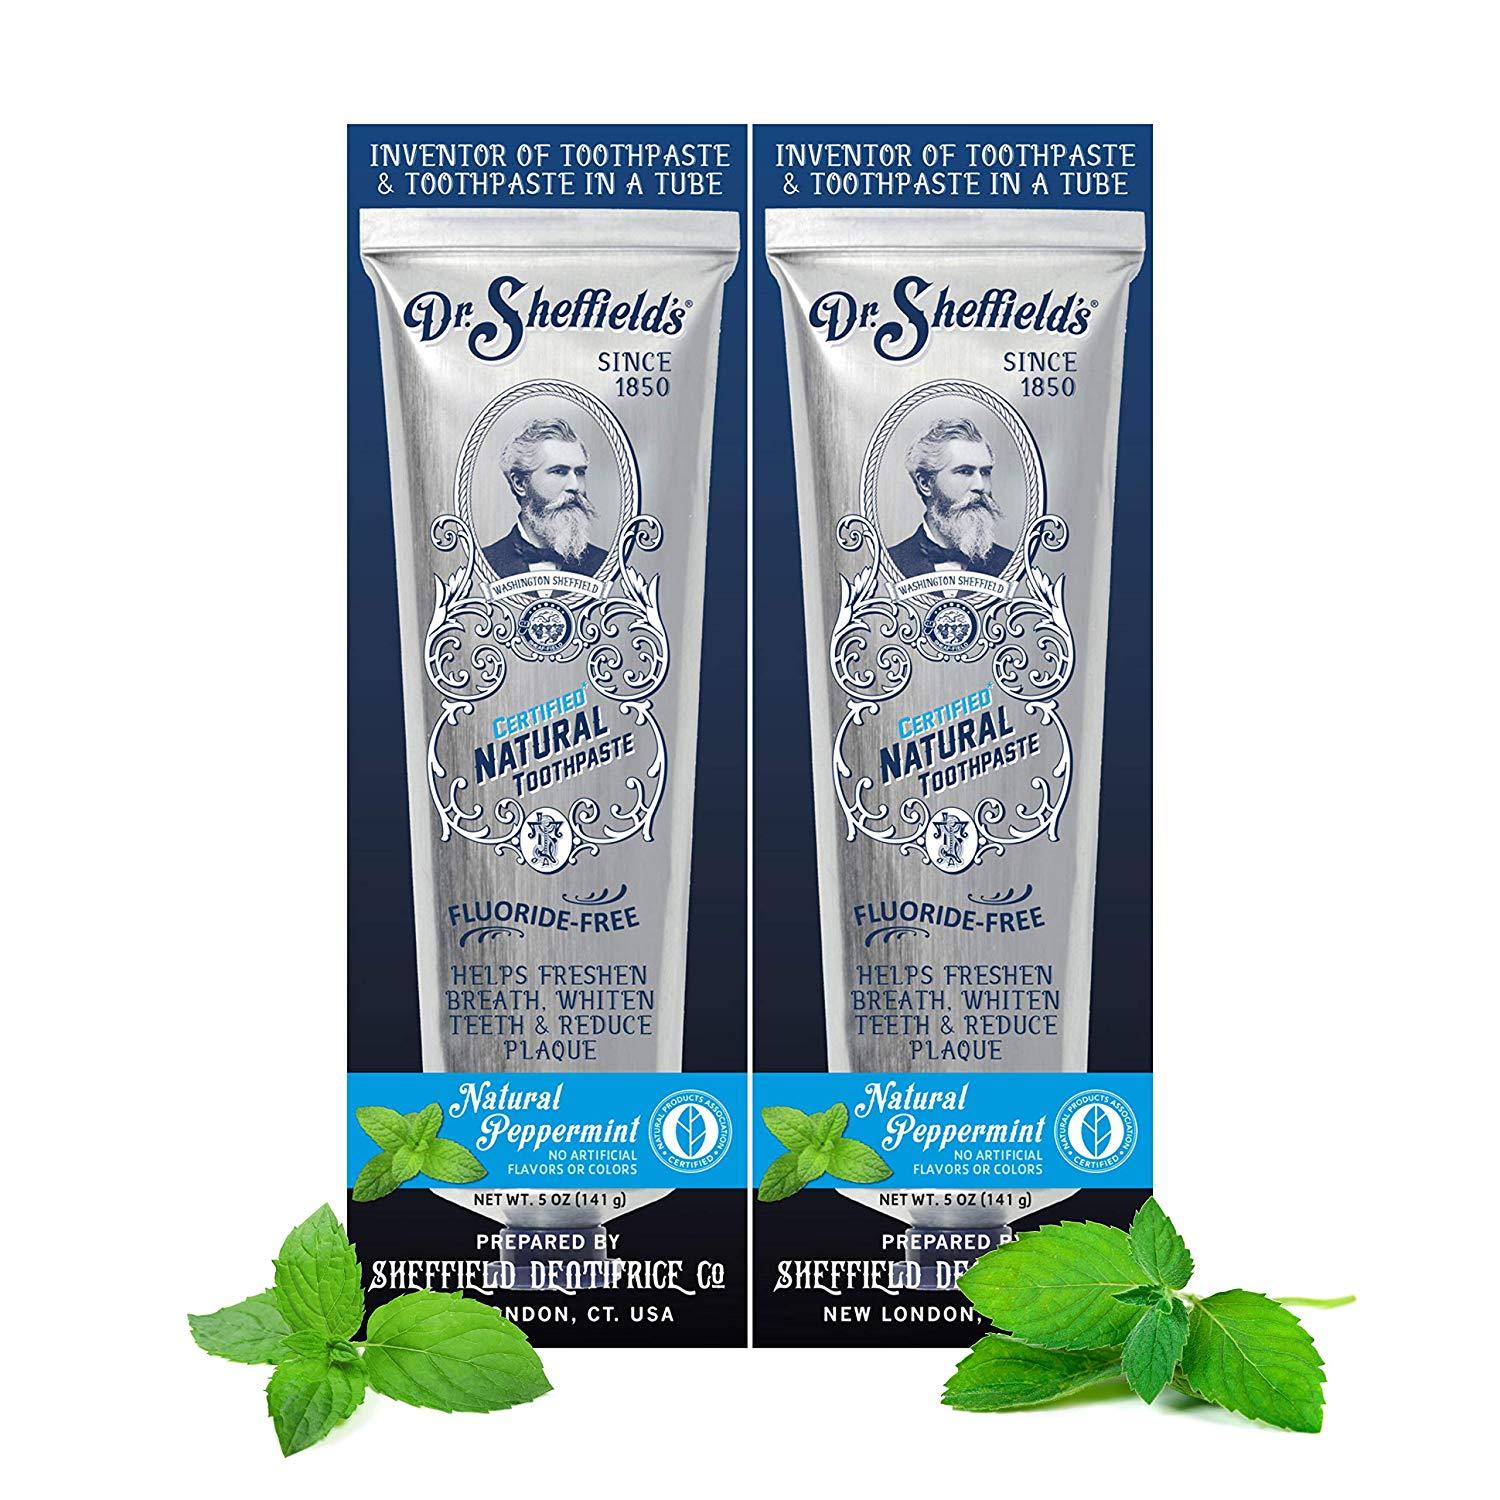  Dr. Sheffields Certified Natural Toothpaste (Peppermint) 2 pack MADE IN USA NEW - $34.90